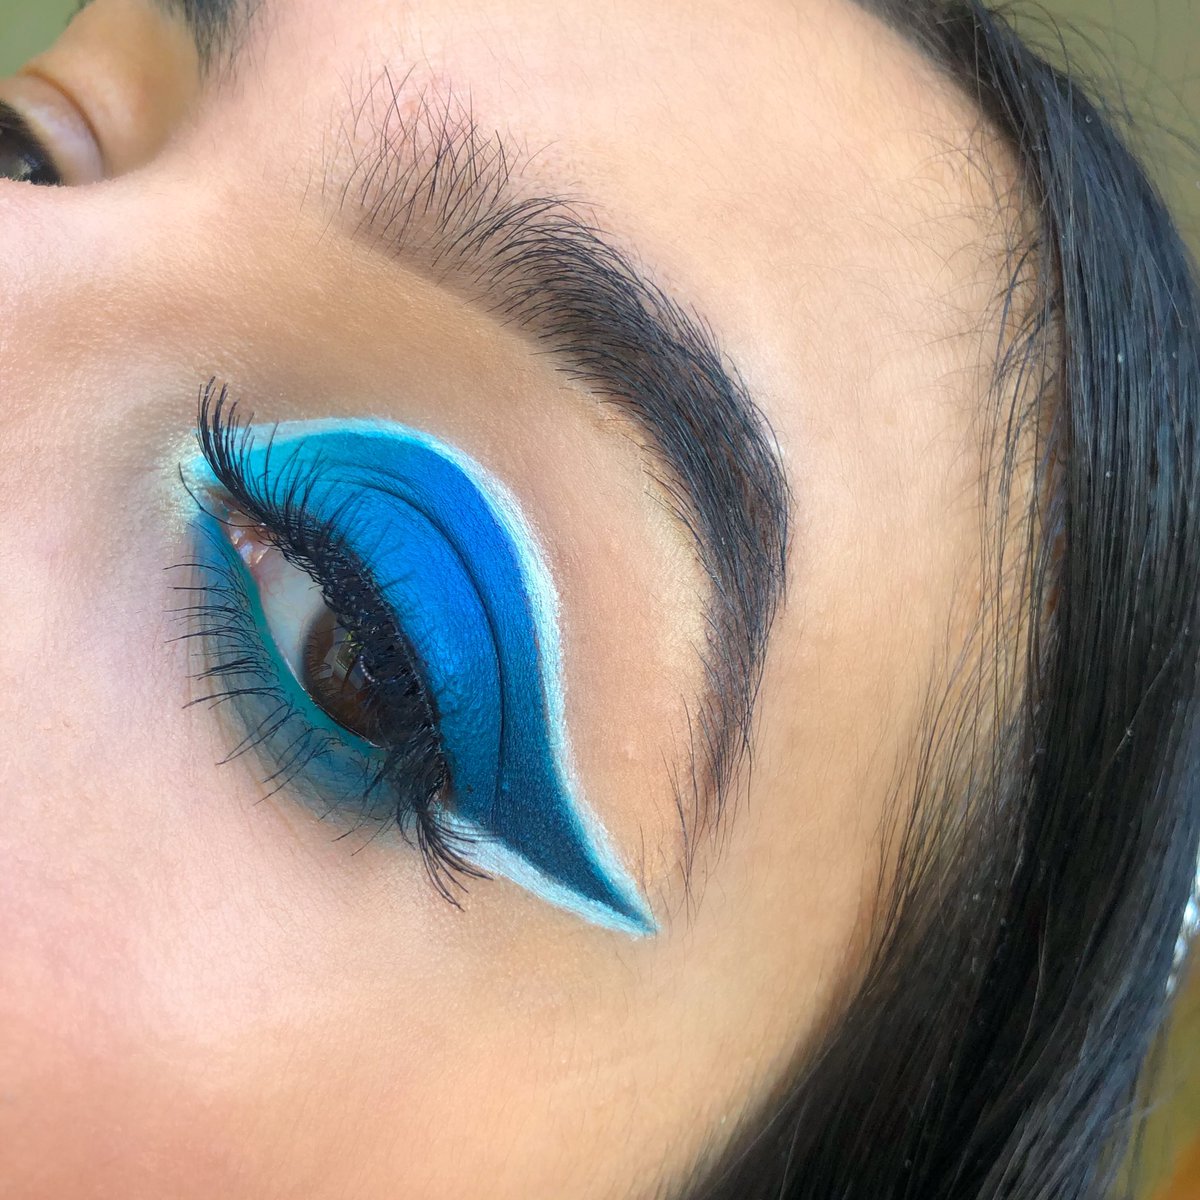 🌊 blue vibes 🌊

💙 follow @mkpbymoon on instagram for more 💙

✨PRODUCTS✨

@MorpheBrushes 35B artistry palette

@bperfectcosm carnival xl pro palette @beautybay 

white eye liner @Sephora 

#morphebabe #generationbeautybay #bperfect #makeup #bluemakeup #makeupenthusiast